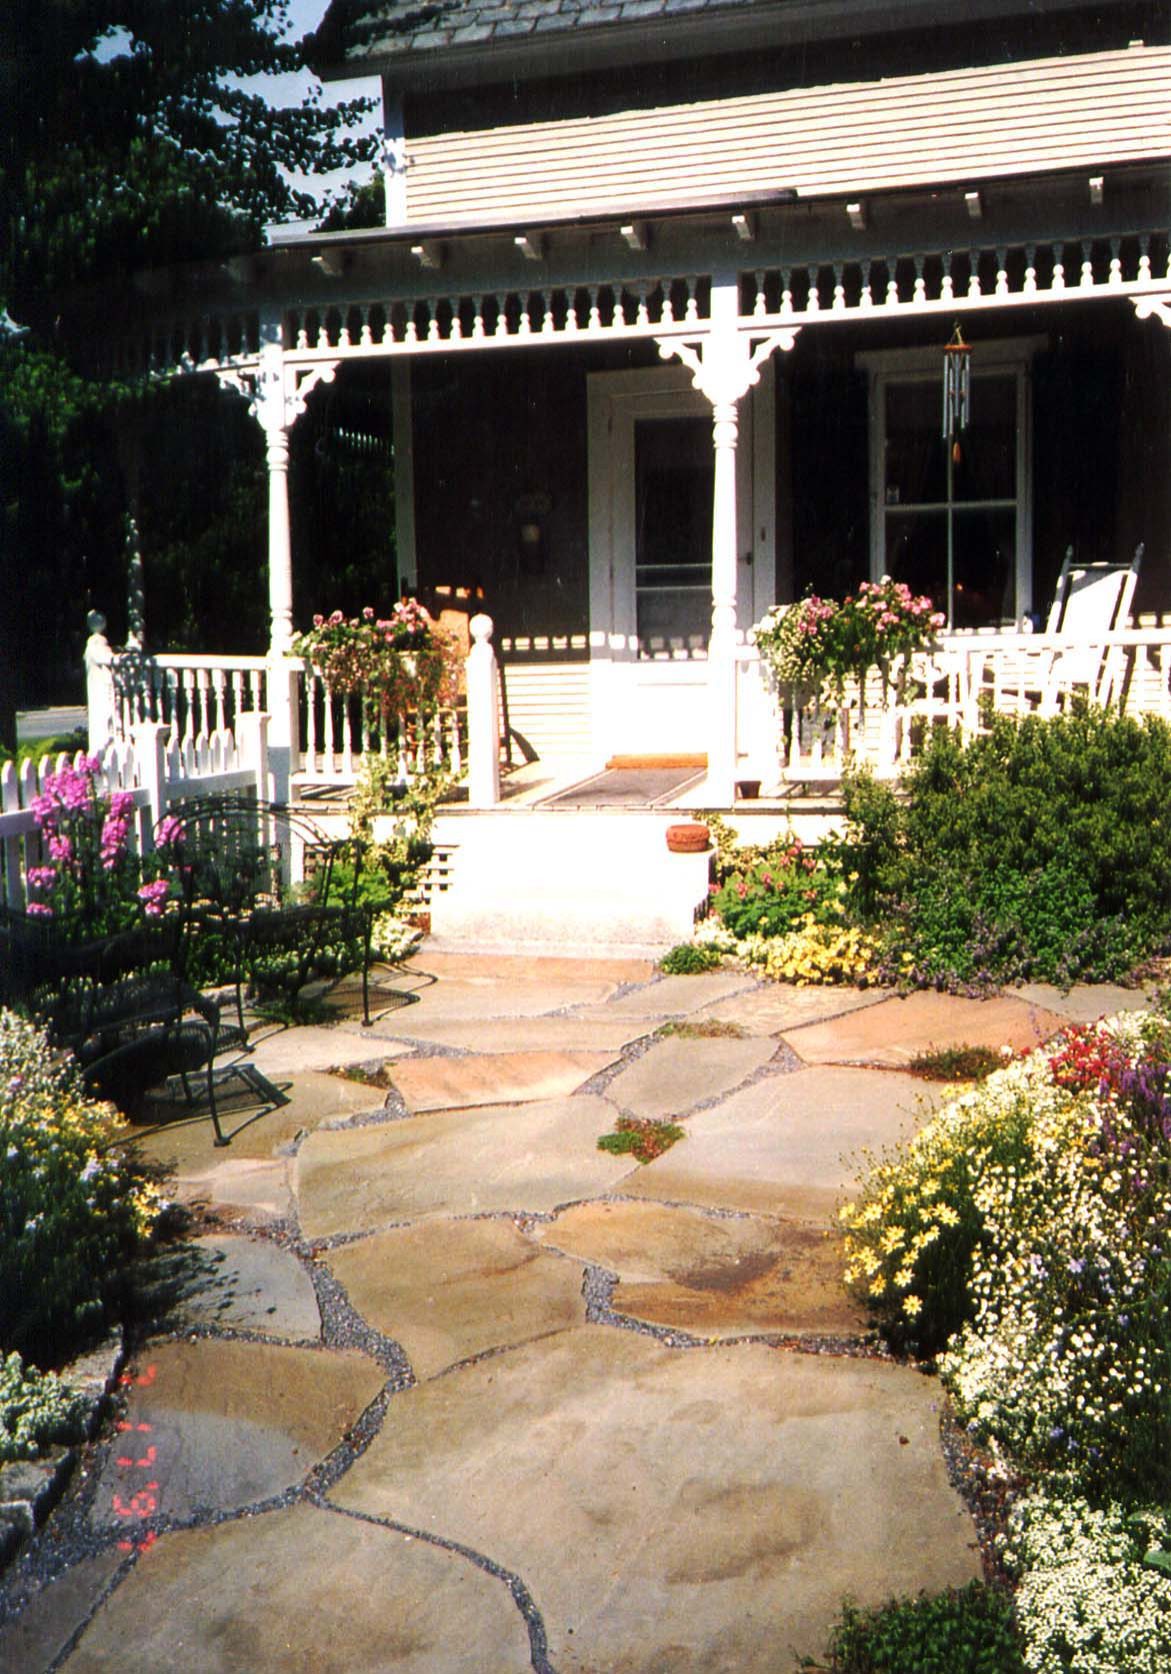 The patio also creates a path to the front door